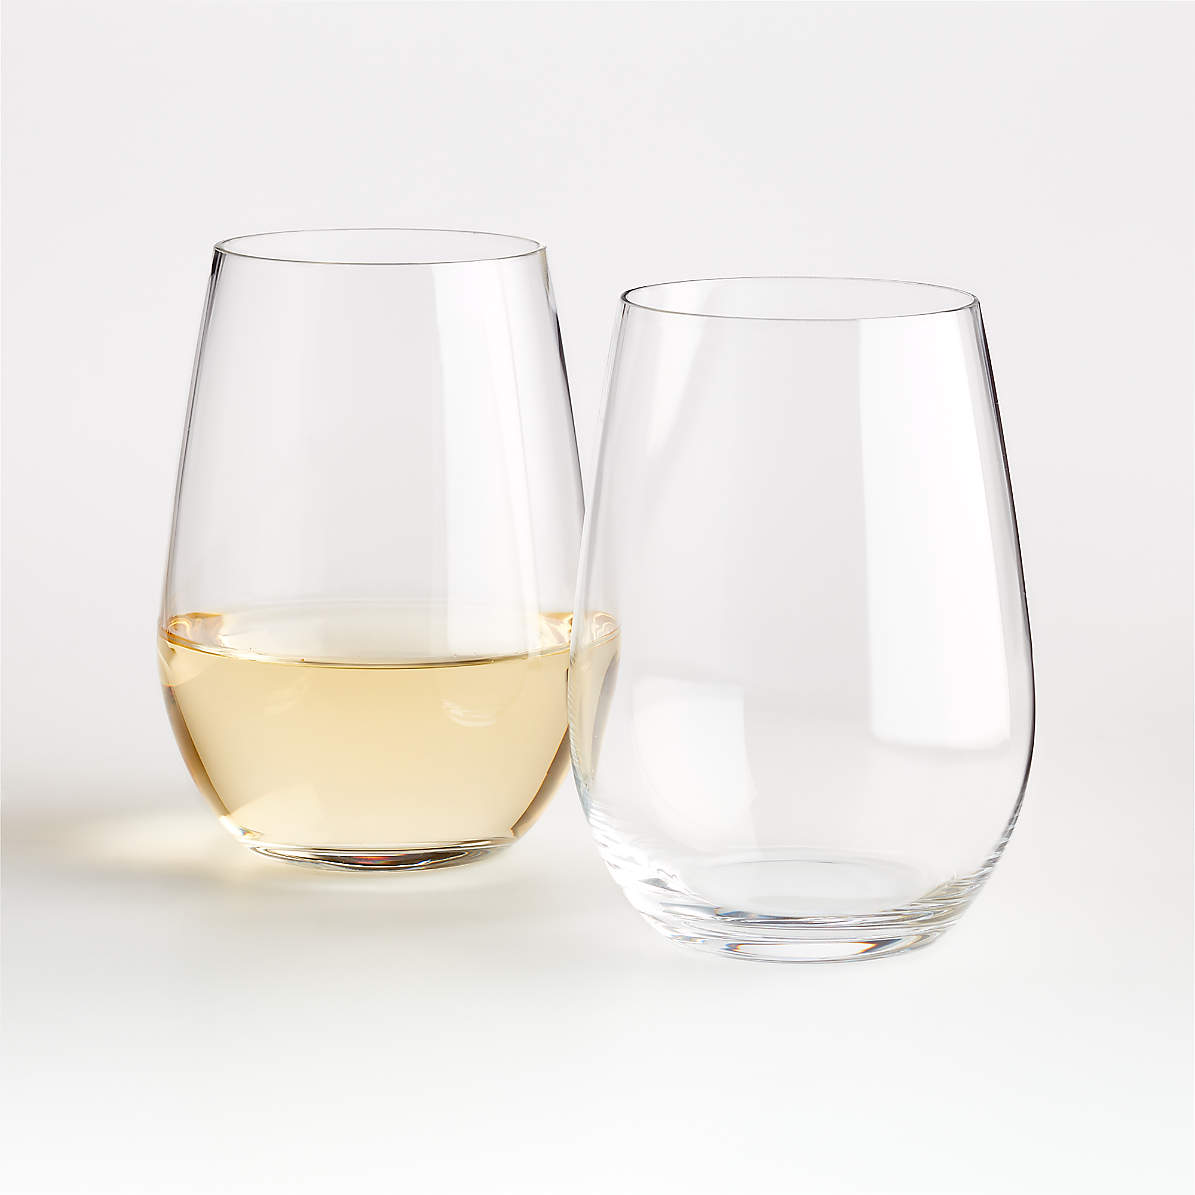 https://cb.scene7.com/is/image/Crate/RiedelOStemlessReisSvBlncS2SHF19/$web_pdp_main_carousel_zoom_med$/191105155647/ea-s-2-riedel-o-stemless-riesling-sauvignon-blanc.jpg